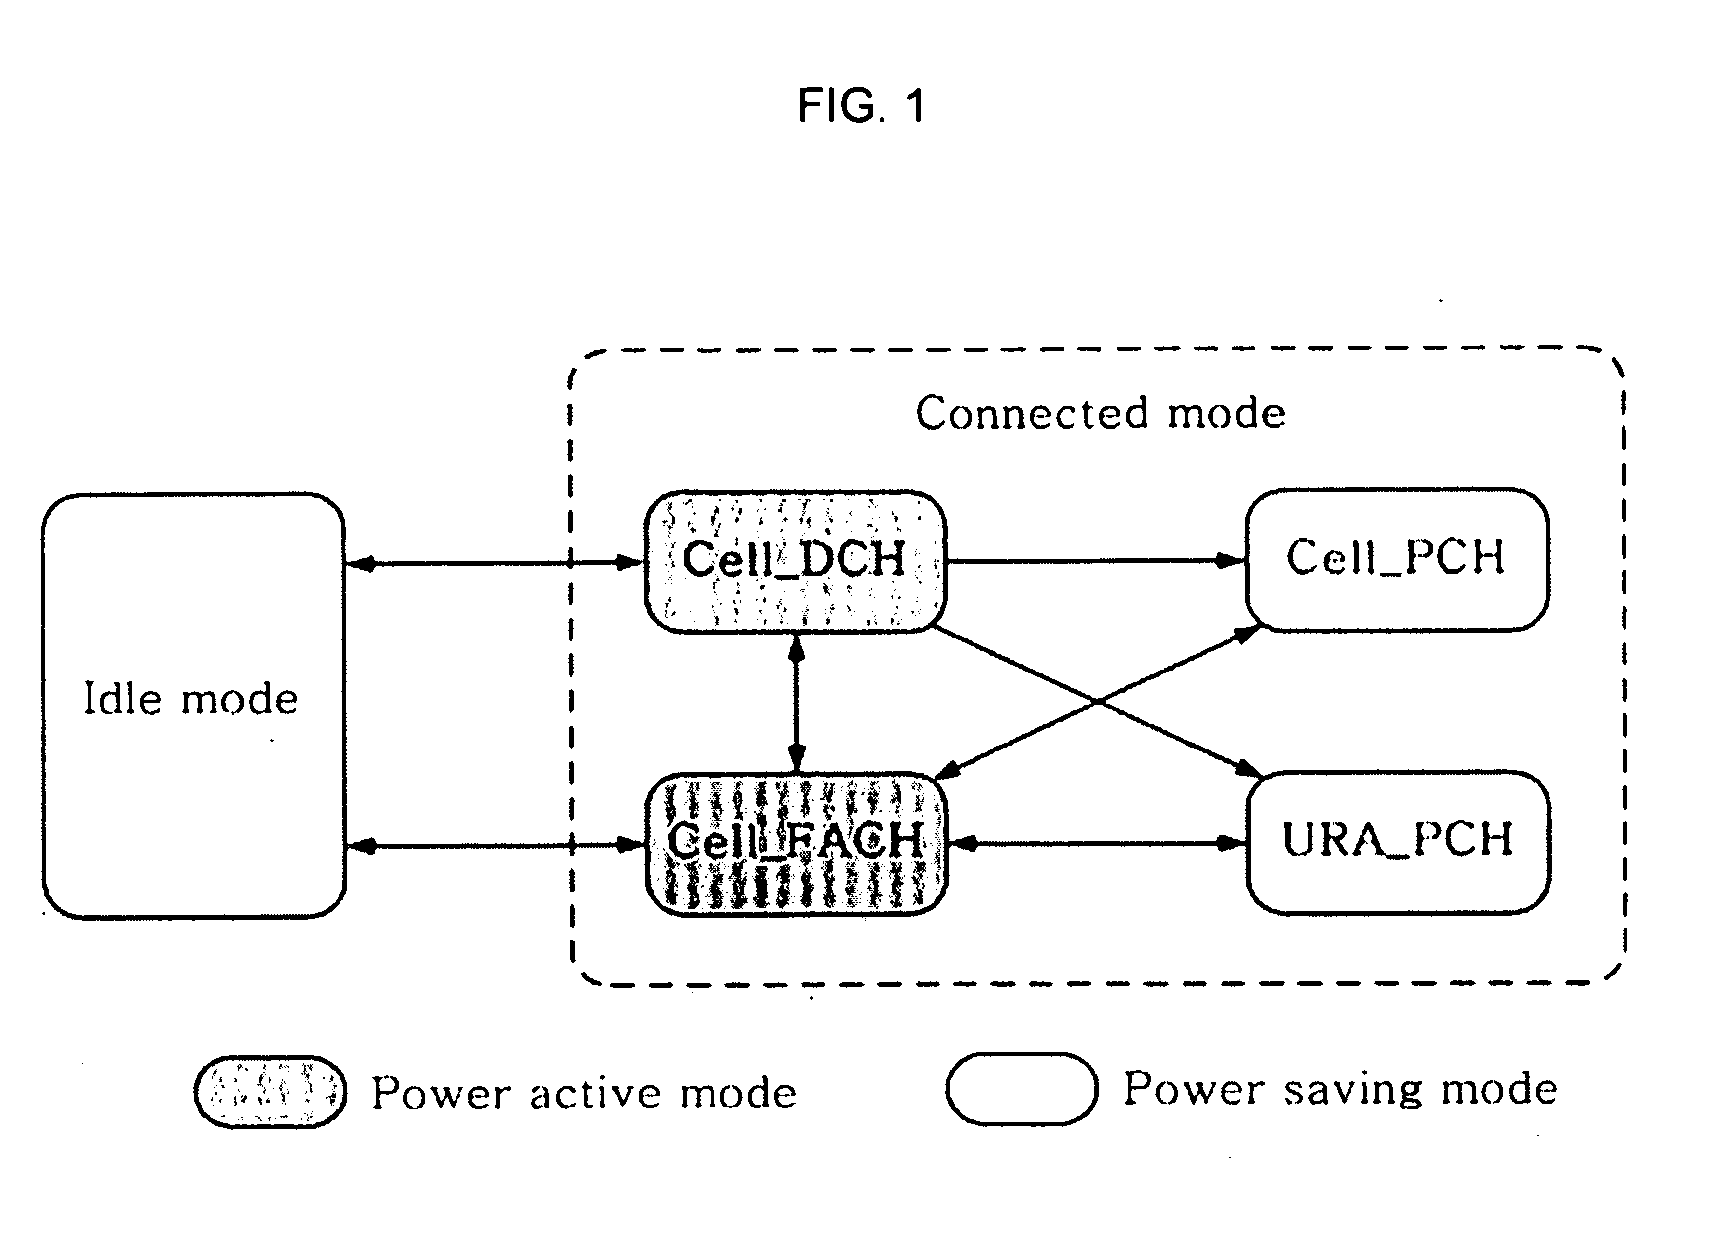 Method for Adaptive Discontinuous Reception Based On Extented Paging Indicator for Improvement of Power Effective Performance at Mobile Terminal on WCDMA